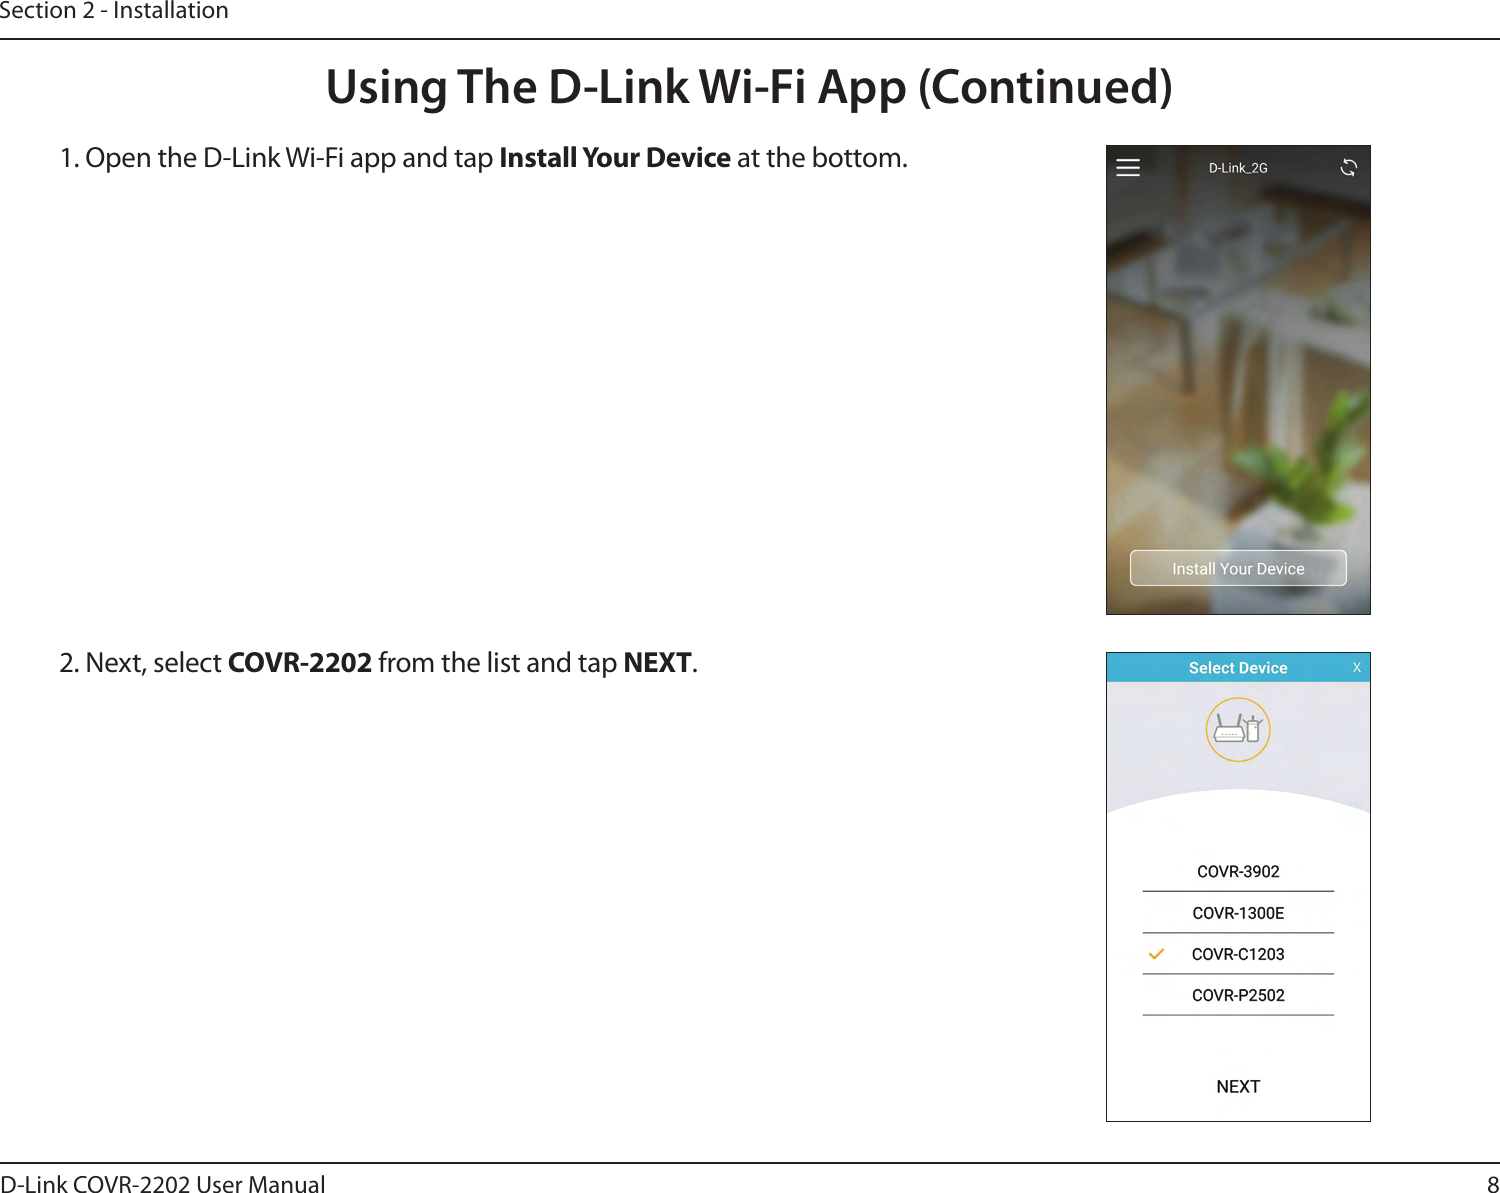 8D-Link COVR-2202 User ManualSection 2 - InstallationUsing The D-Link Wi-Fi App (Continued)1. Open the D-Link Wi-Fi app and tap Install Your Device at the bottom.2. Next, select COVR-2202 from the list and tap NEXT.